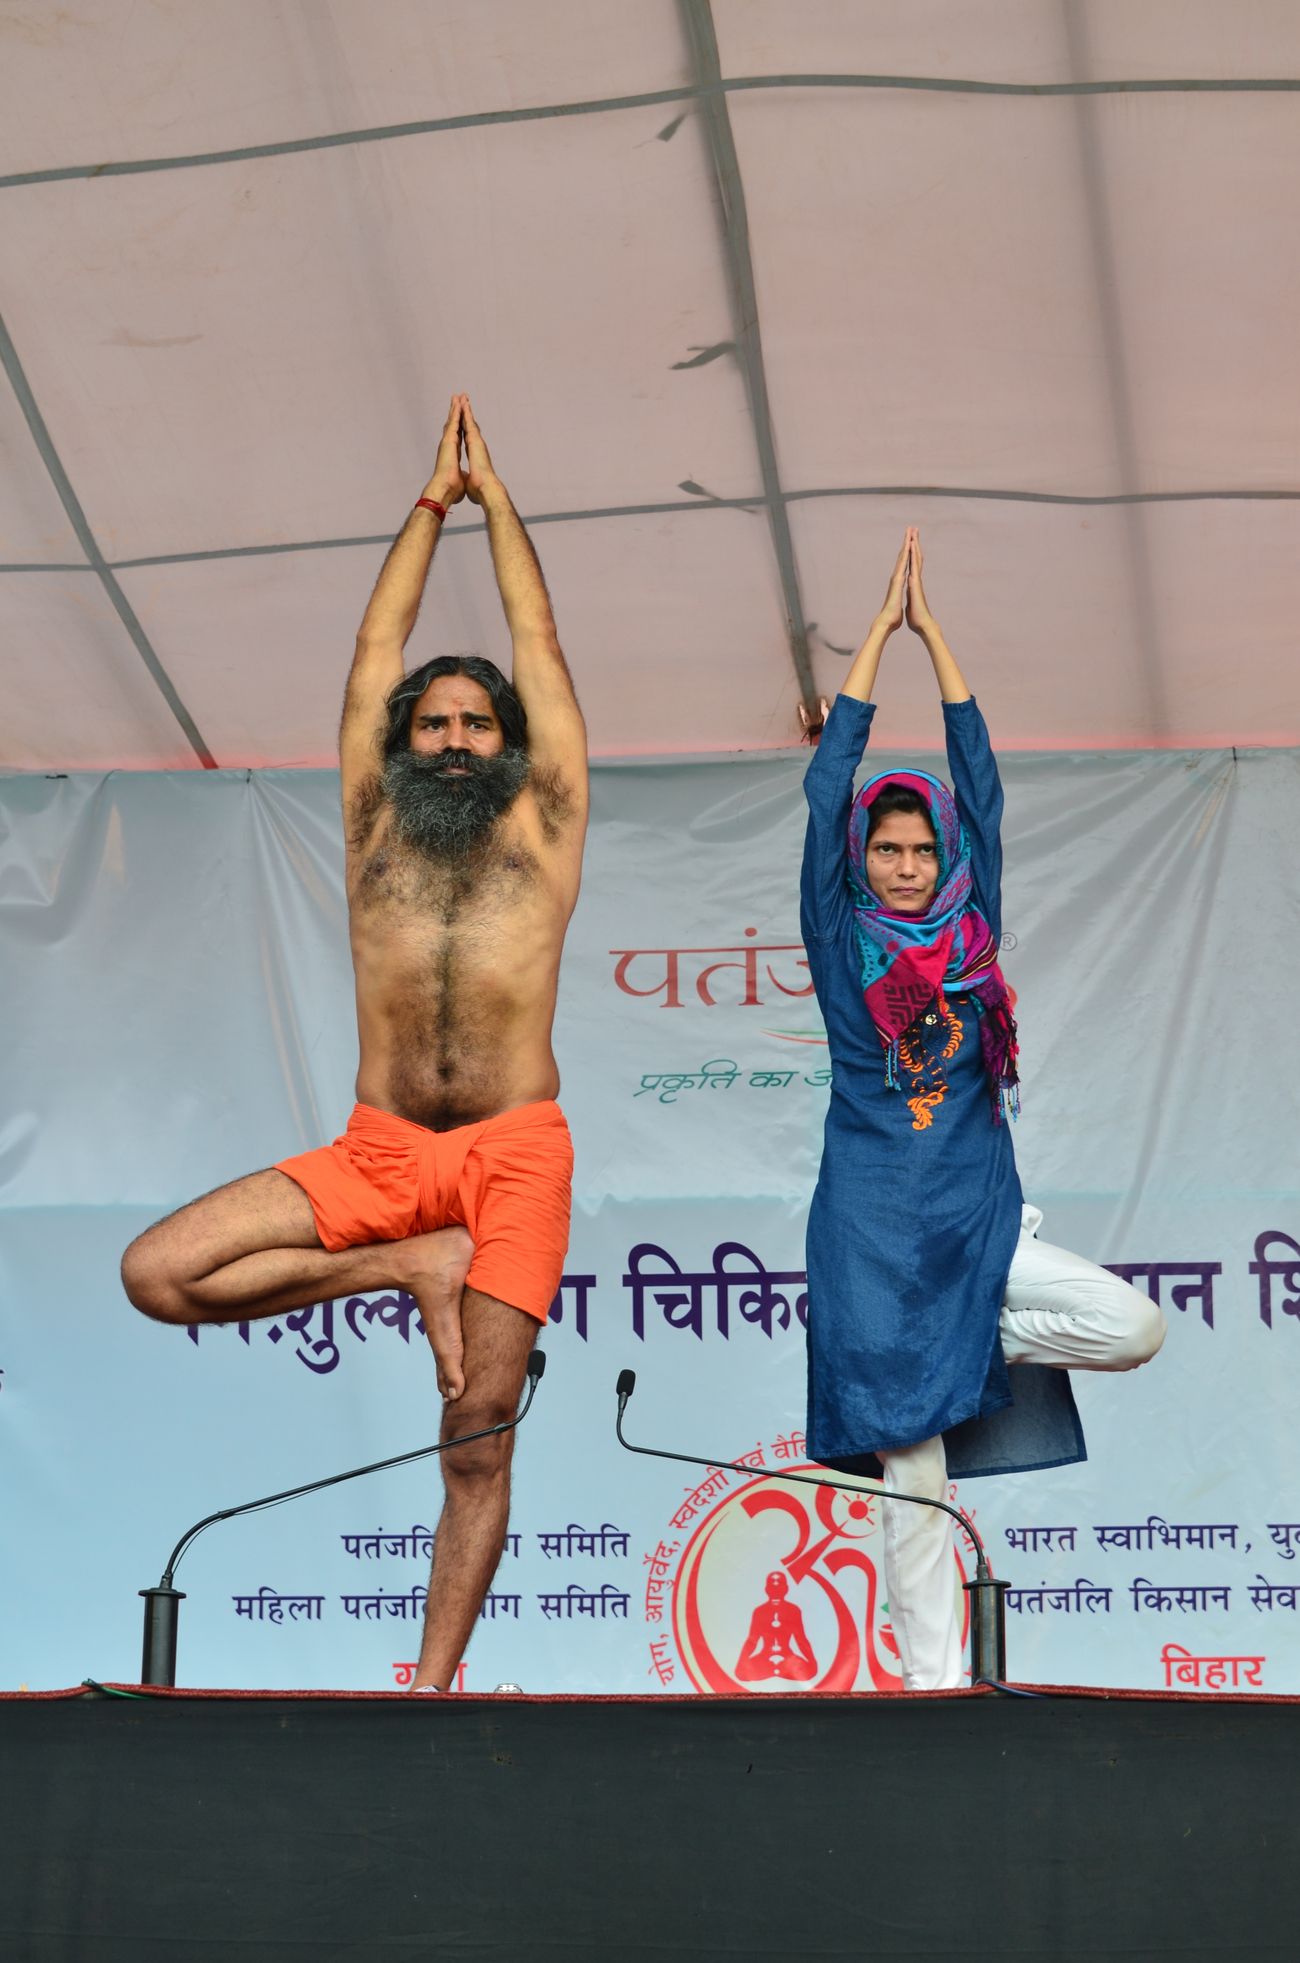 The slow-paced Hatha Yoga involves holding the posture for a few breaths. Renowned yoga guru, Baba Ramdev performs a yogasana on the stage on the final day of the three-day yoga camp at Gaya in Bihar.